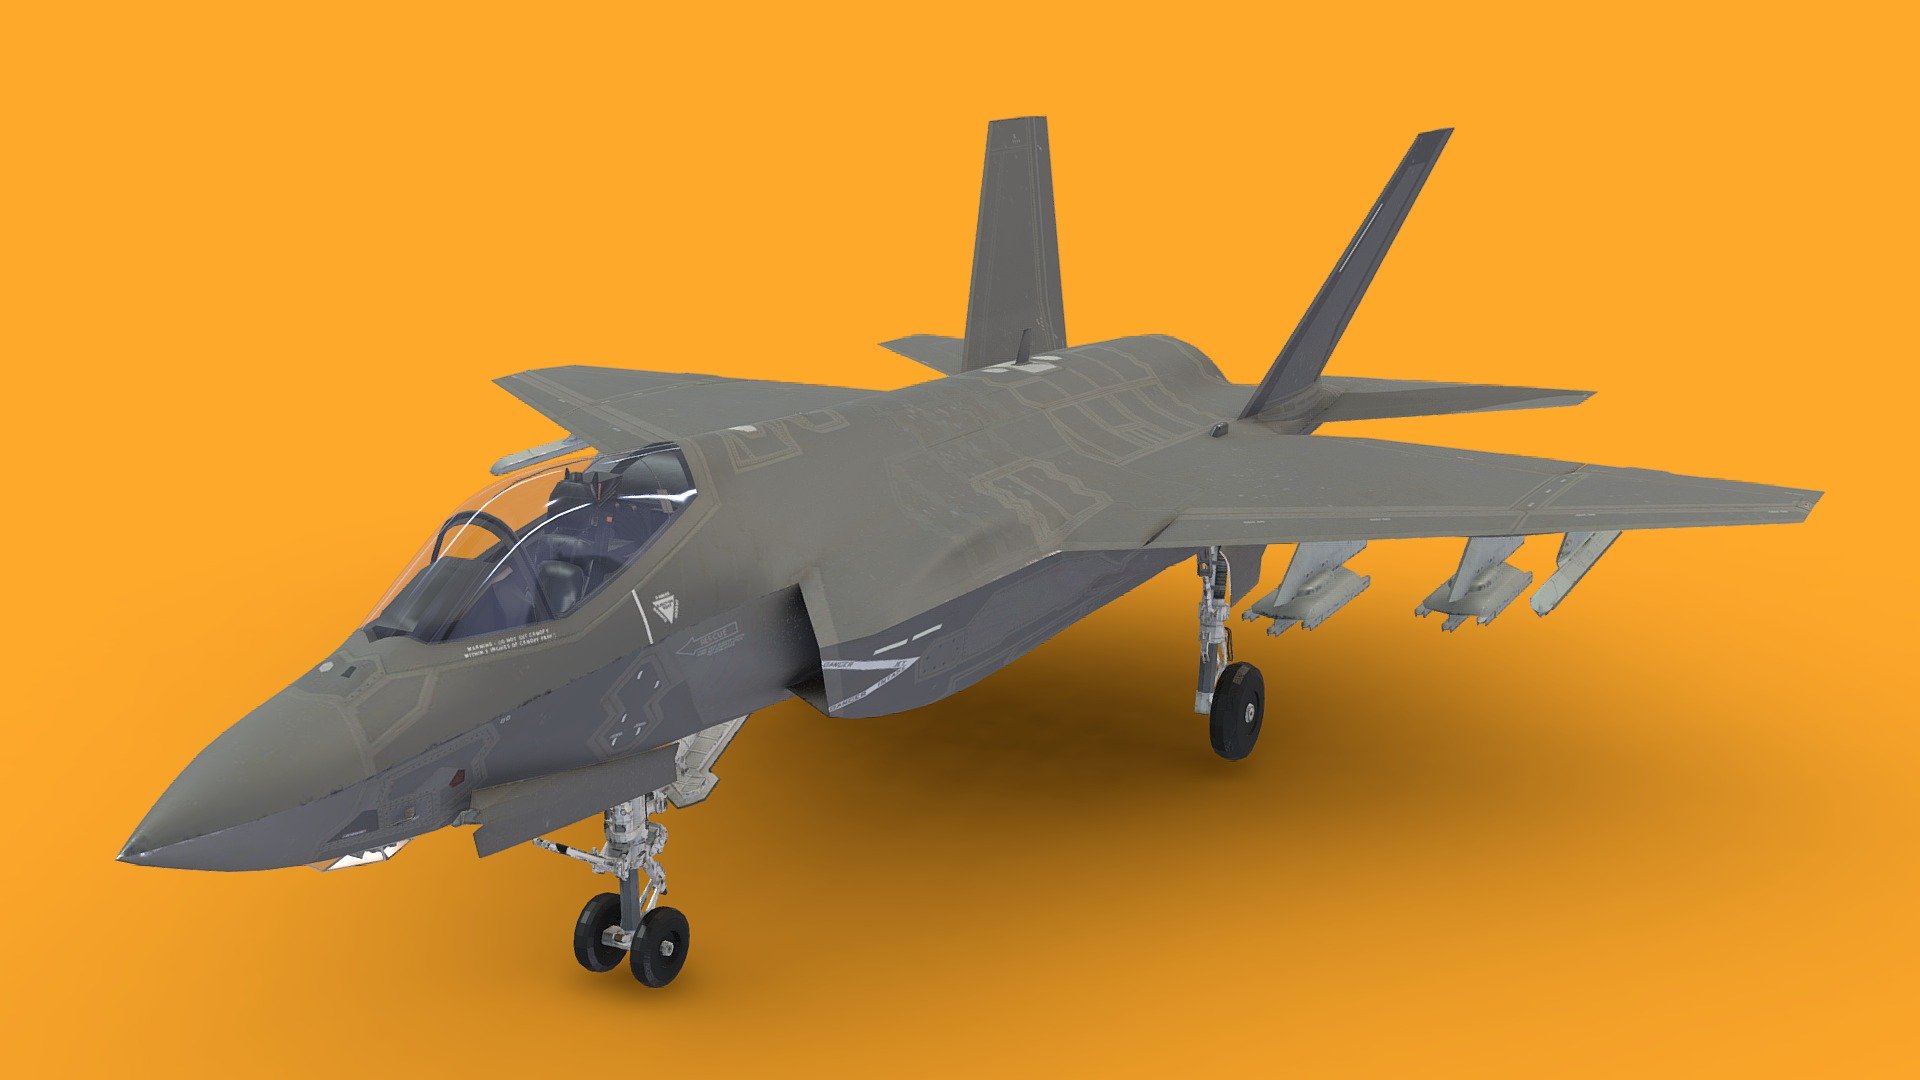 The Lockheed Martin F-35 Lightning II is an American family of single-seat, single-engine, all-weather stealth multirole combat aircraft that is intended to perform both air superiority and strike missions. It is also able to provide electronic warfare and intelligence, surveillance, and reconnaissance capabilities.

The aircraft has three main variants: the conventional takeoff and landing F-35A, the short take-off and vertical-landing F-35B, and the carrier-based F-35C.

The F-35 first flew in 2006 and entered service with the U.S. Marine Corps F-35B in July 2015, followed by the U.S. Air Force F-35A in August 2016 and the U.S. Navy F-35C in February 2019. The aircraft was first used in combat in 2018 by the Israeli Air Force. The U.S. plans to buy 2,456 F-35s through 2044, which will represent the bulk of the crewed tactical aviation of the U.S. Air Force, Navy, and Marine Corps for several decades; the aircraft is planned to be a cornerstone of NATO and U.S.-allied air power and to operate until 2070 3d model